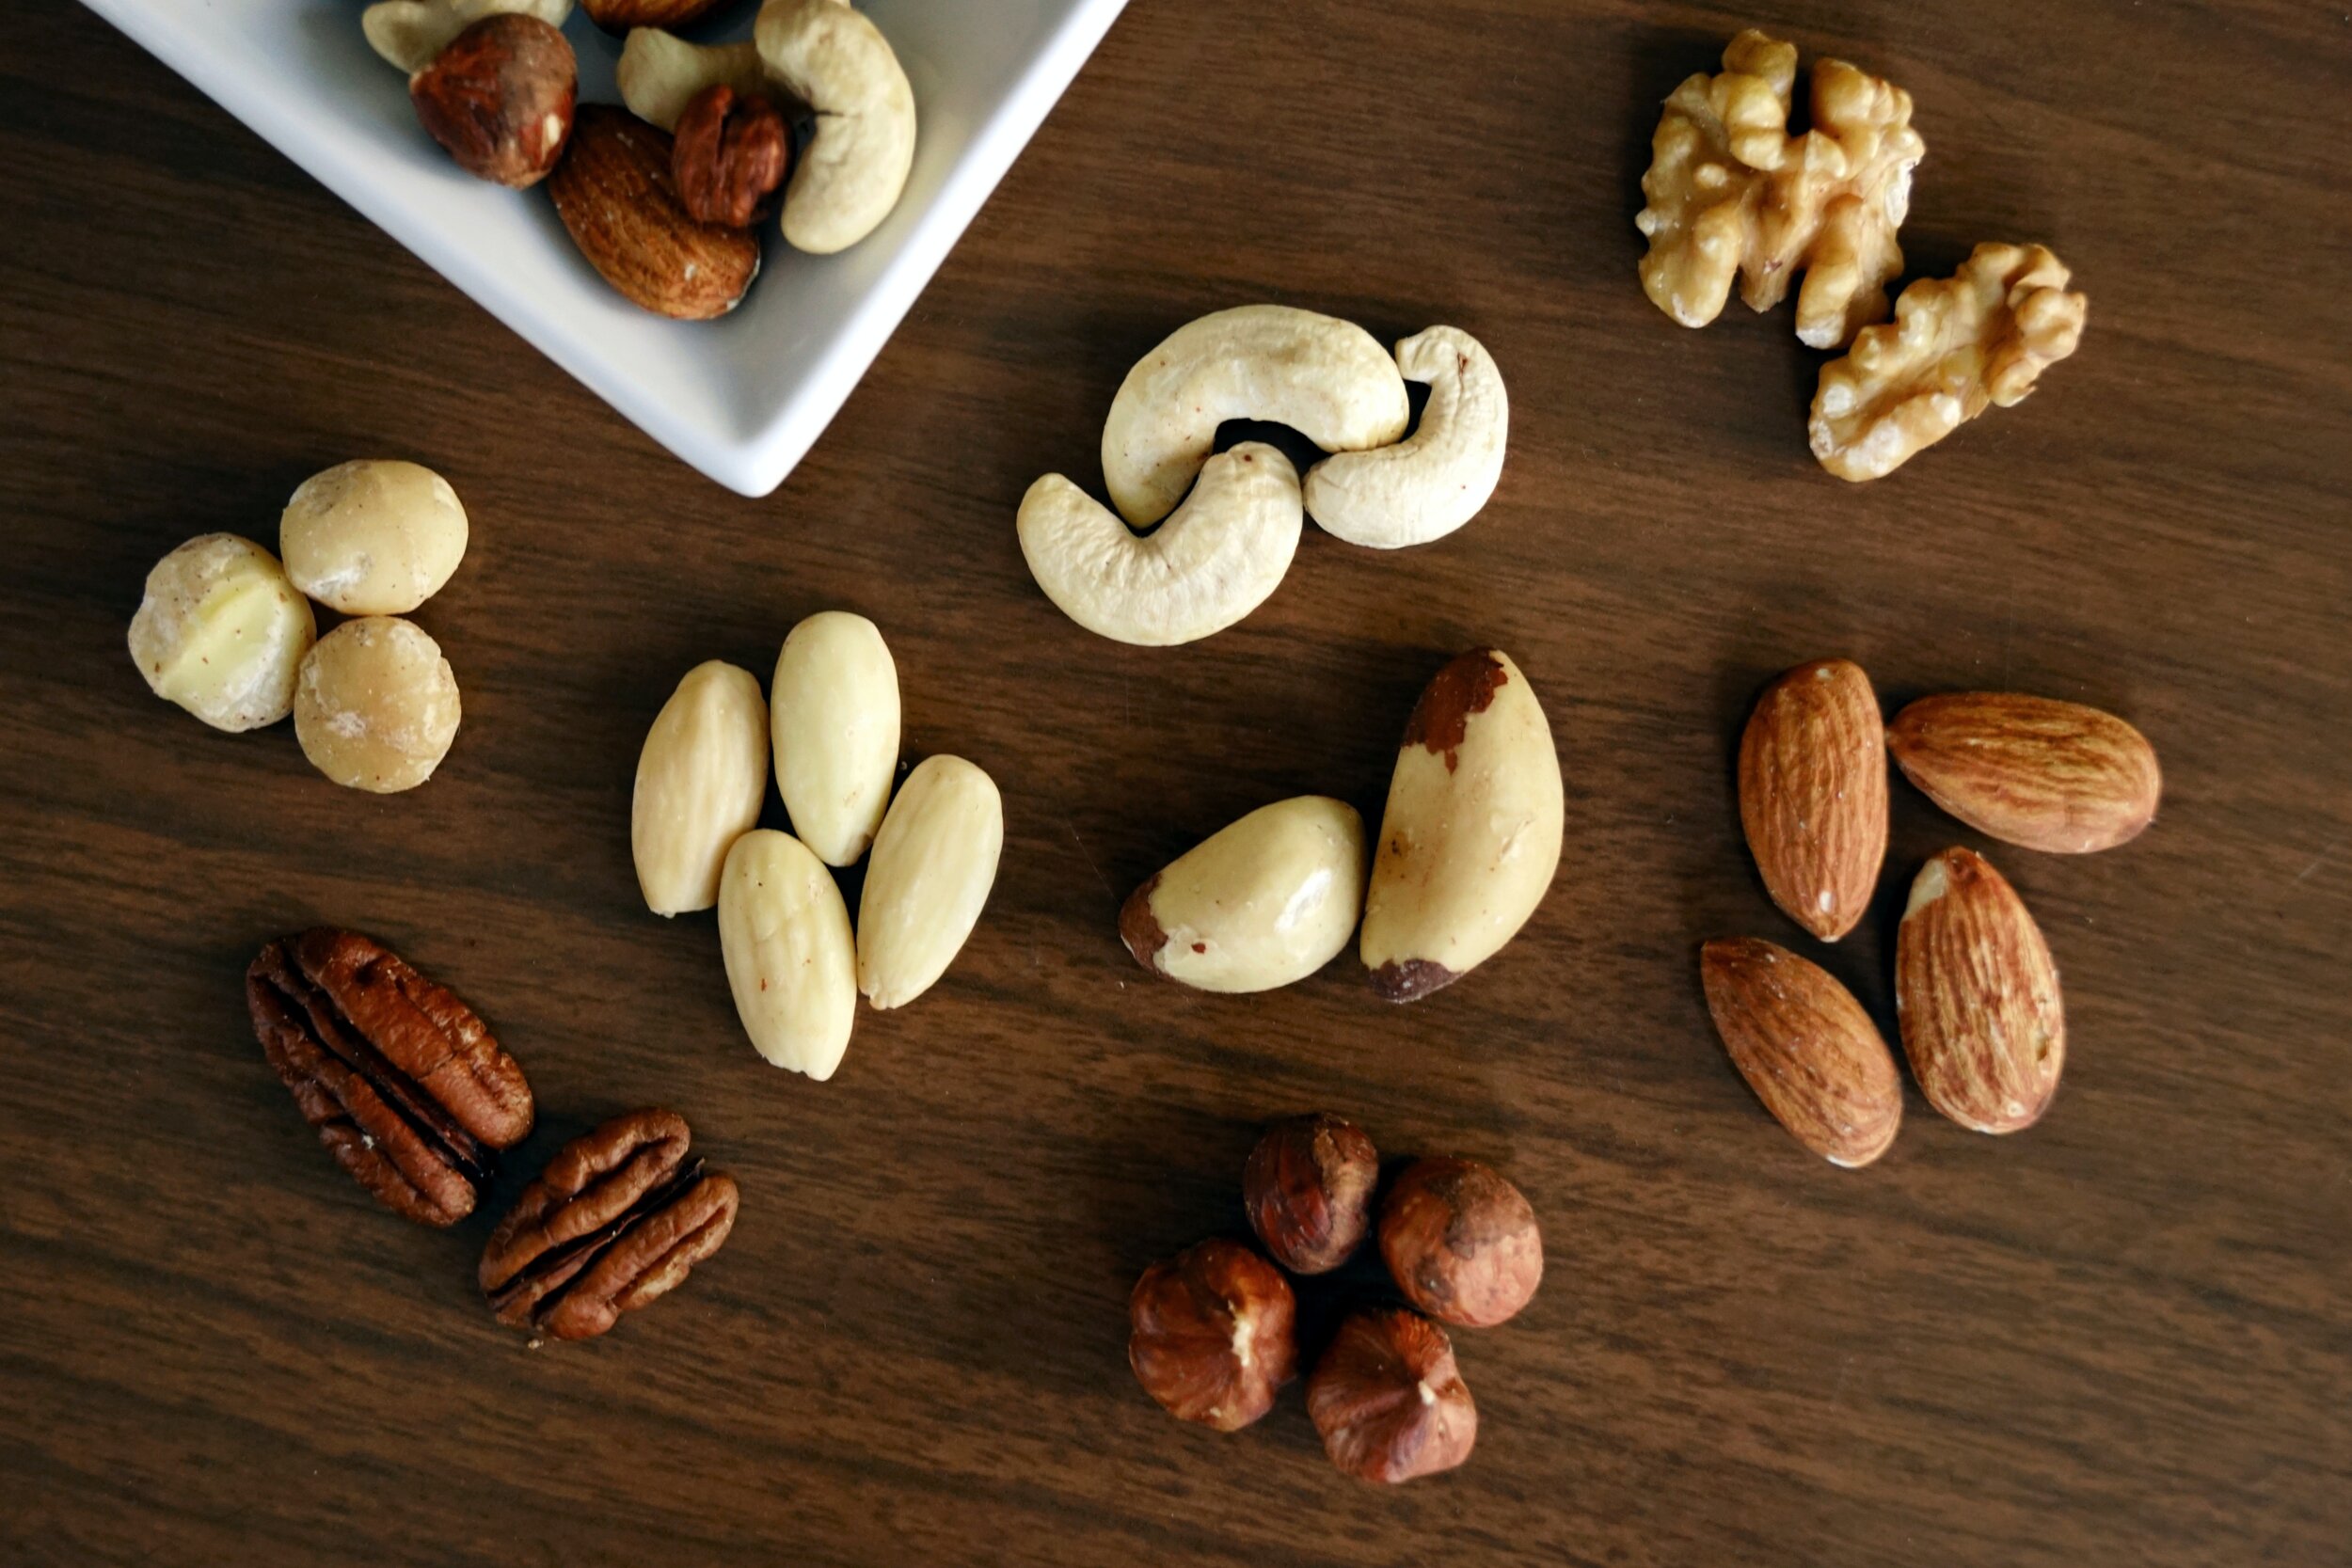 variety-of-brown-nuts-on-brown-wooden-panel-high-angle-photo-1295572.jpg